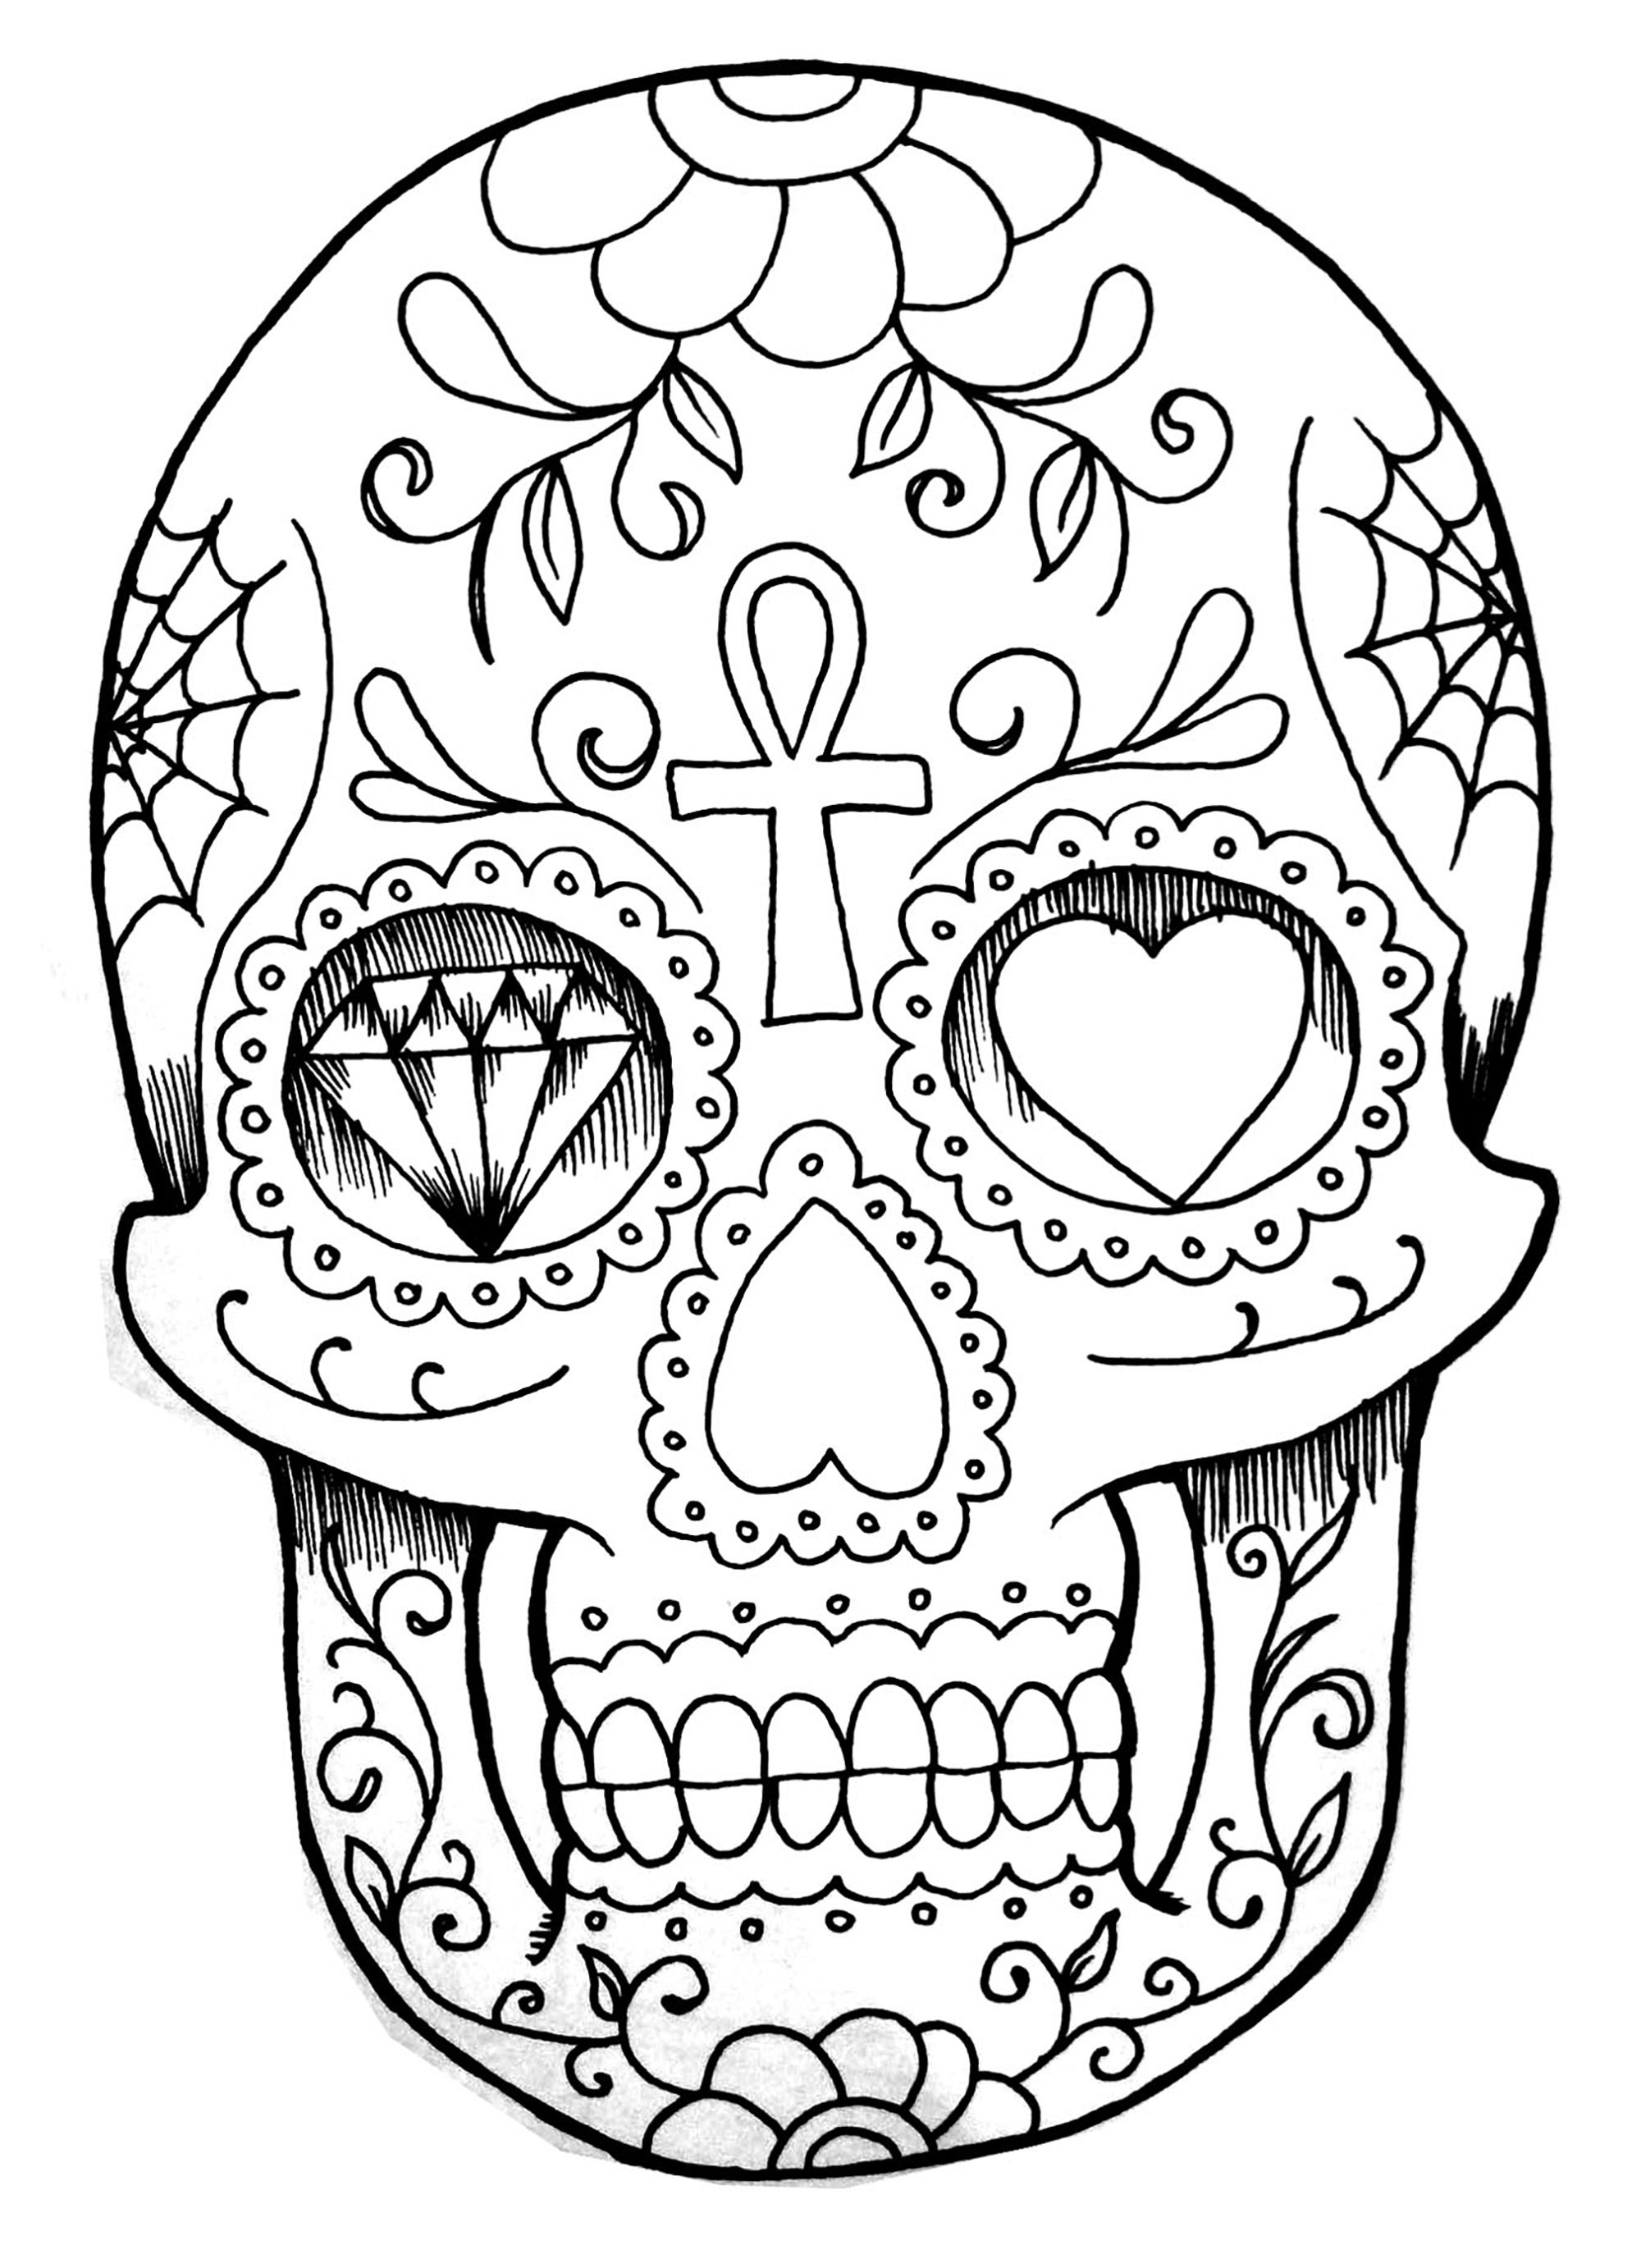 skull-coloring-pages-for-adults